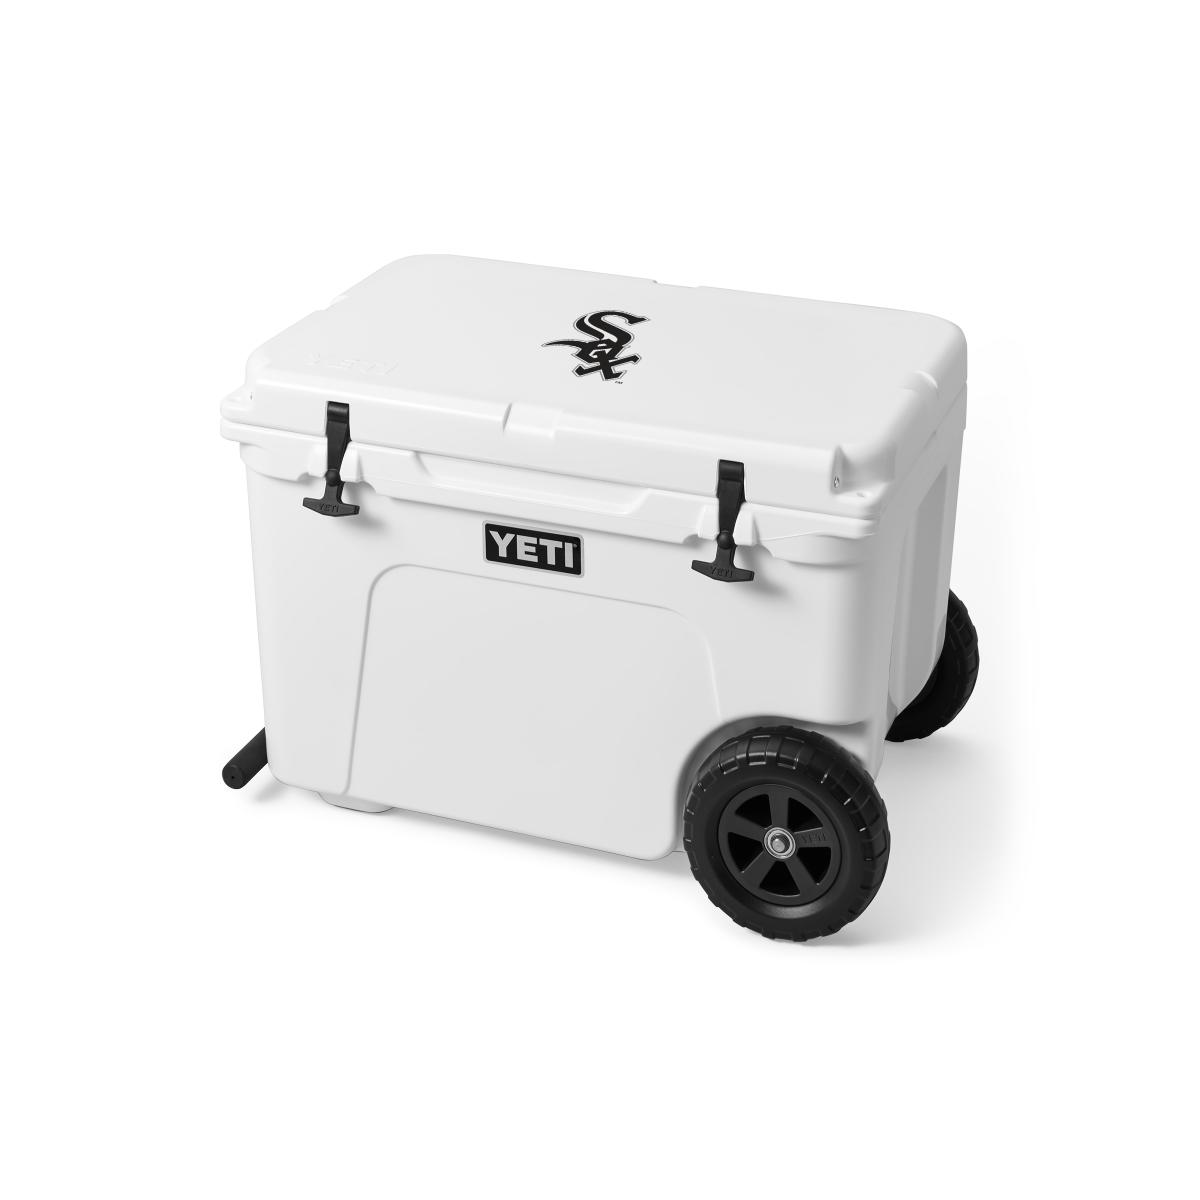 Chicago White Sox Tundra Haul Cooler - $550.00